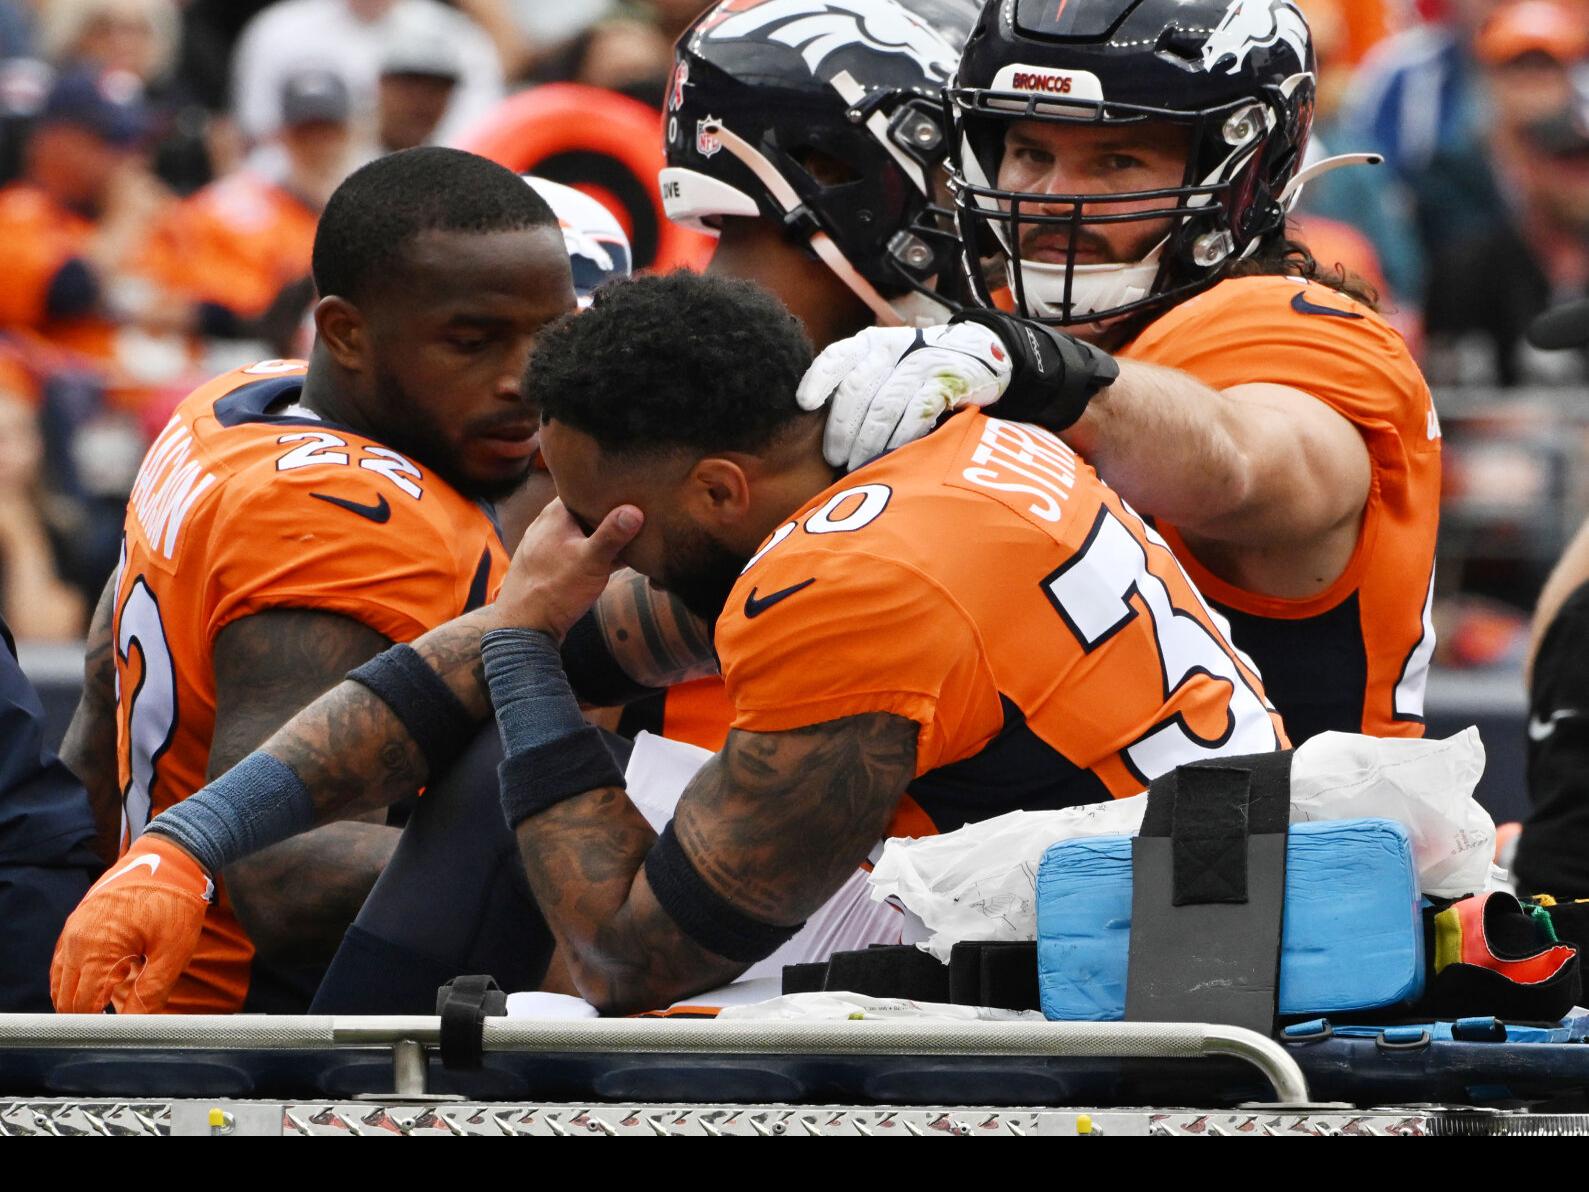 Broncos S Caden Sterns out for season with knee injury, report says